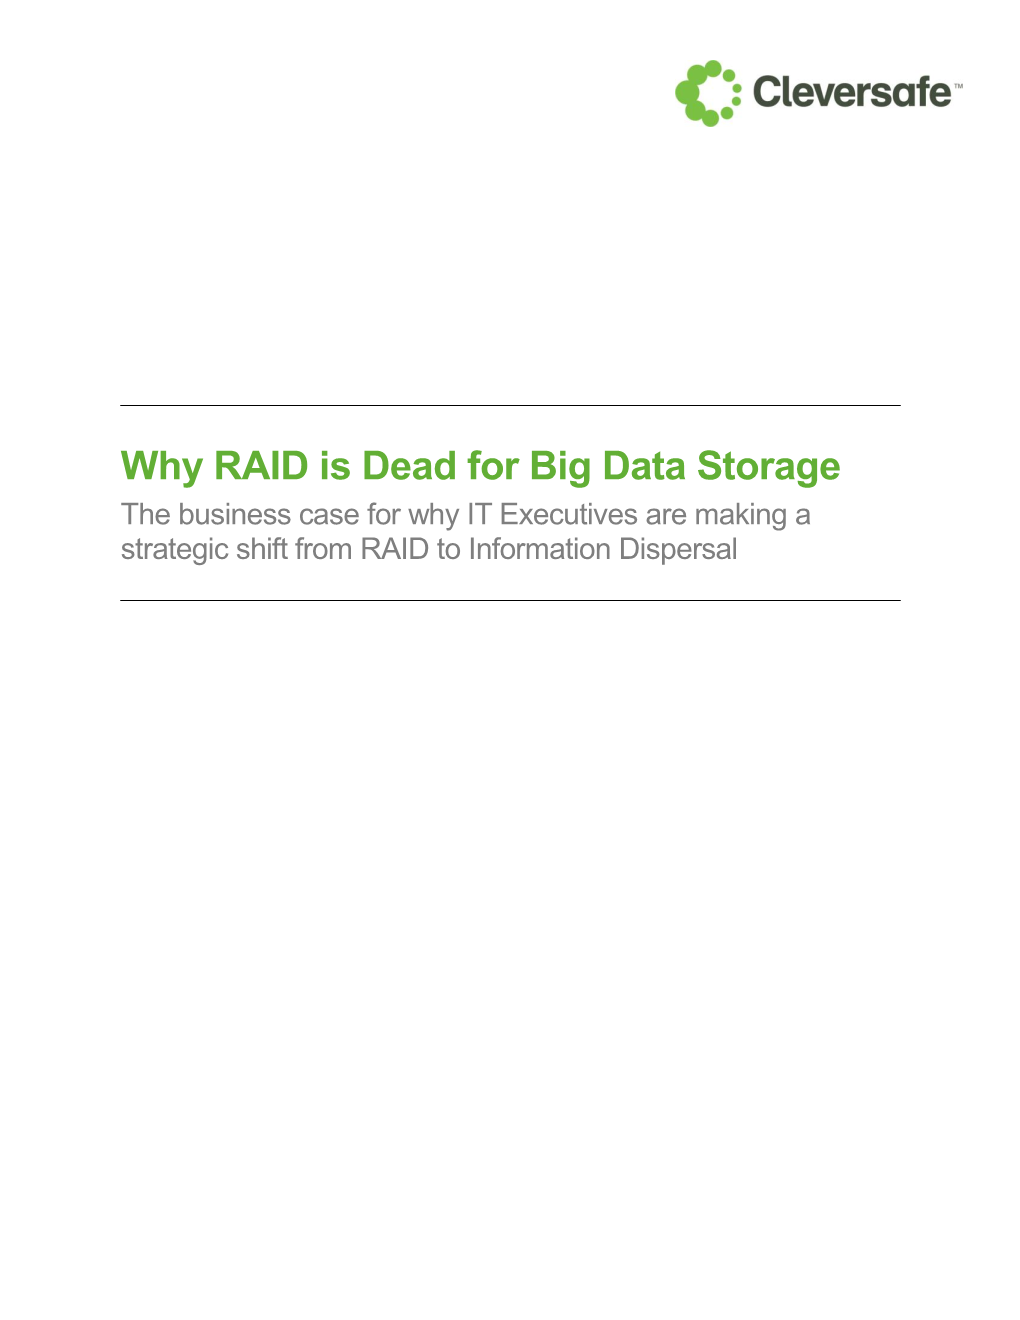 Why RAID Is Dead for Big Data Storage the Business Case for Why IT Executives Are Making a Strategic Shift from RAID to Information Dispersal